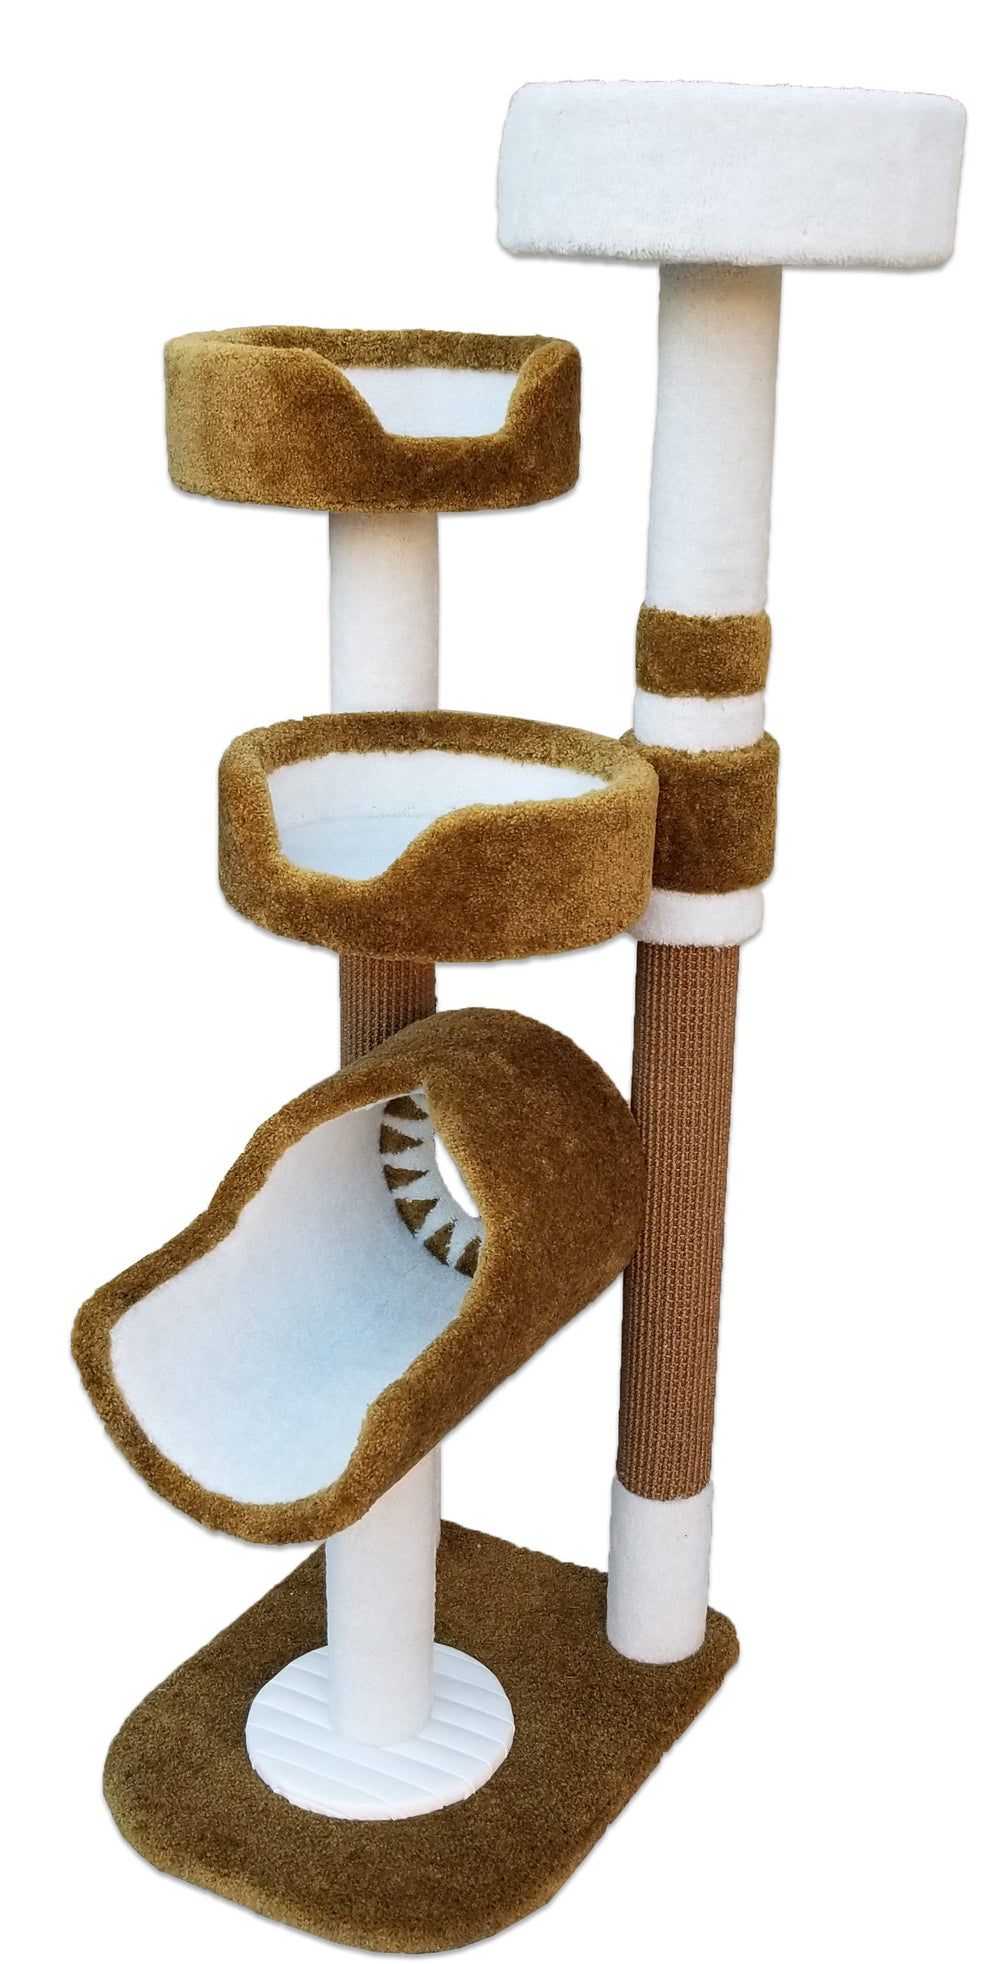 K3B Luxury Cat Tower with 3 Cat Beds